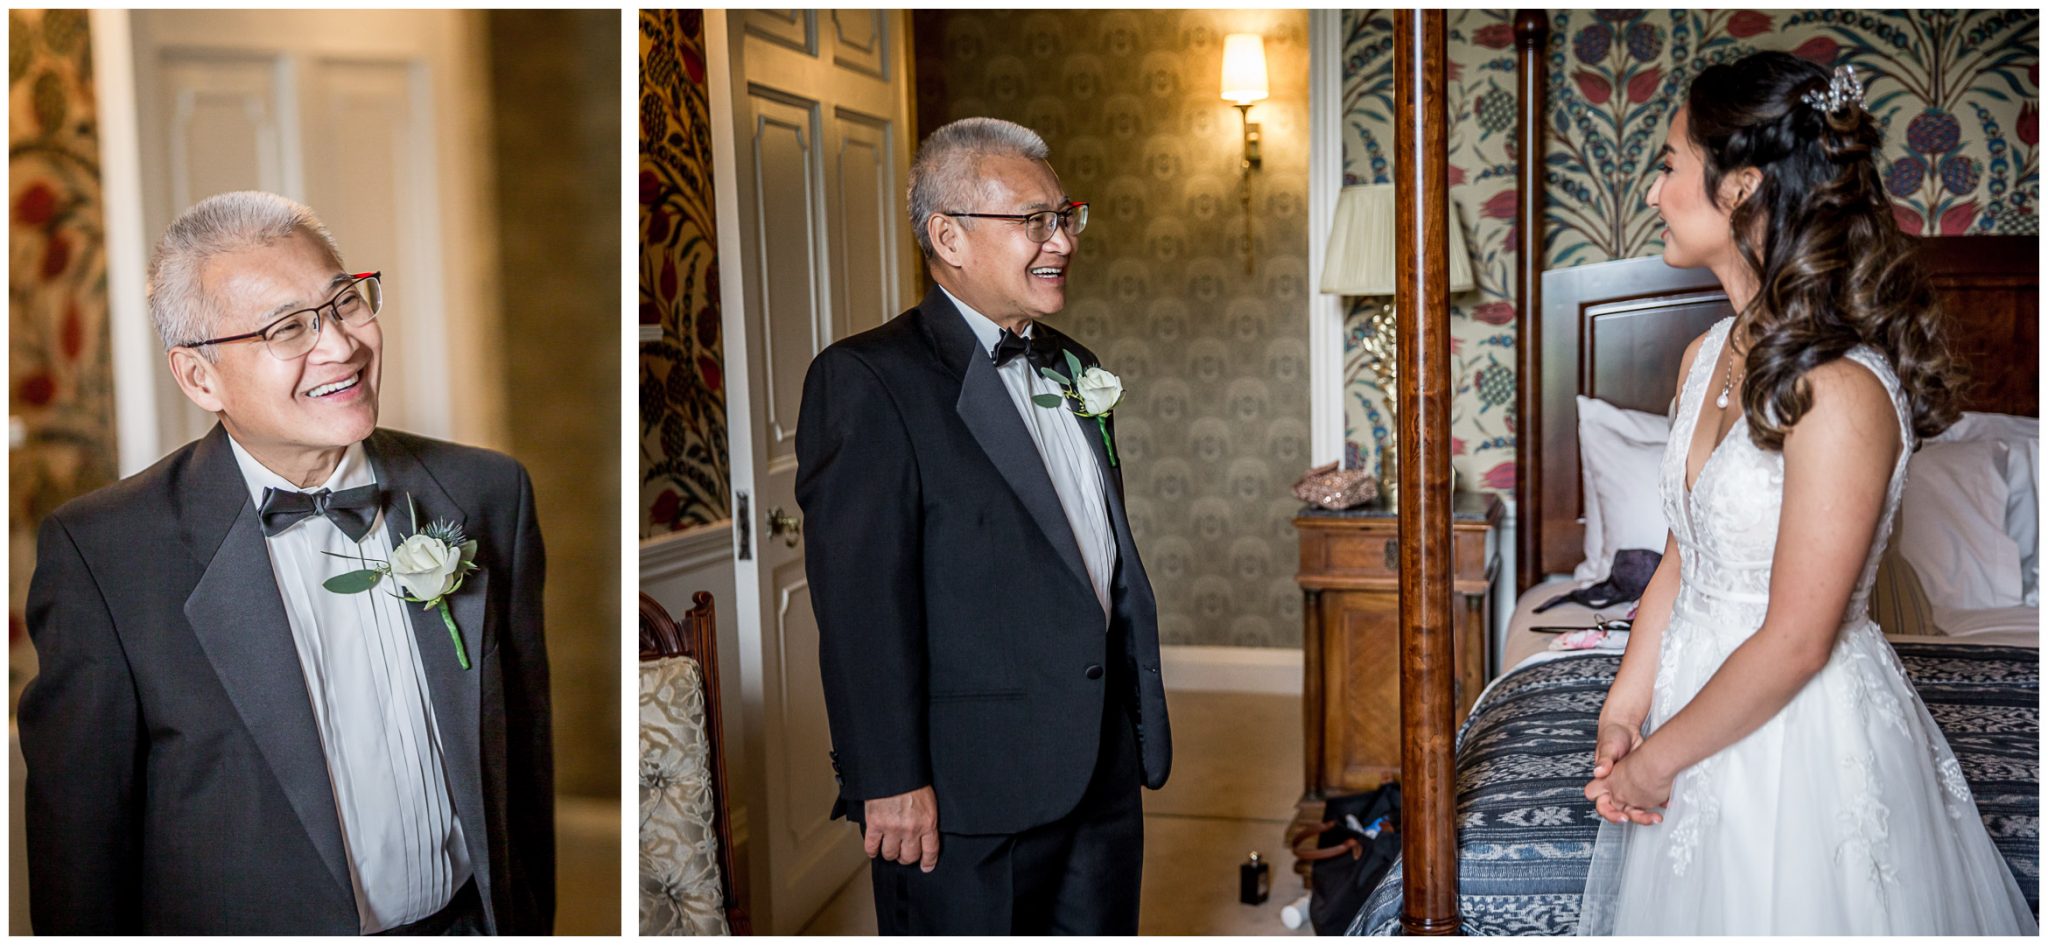 The father of the bride sees his daughter in her wedding dress for the first time